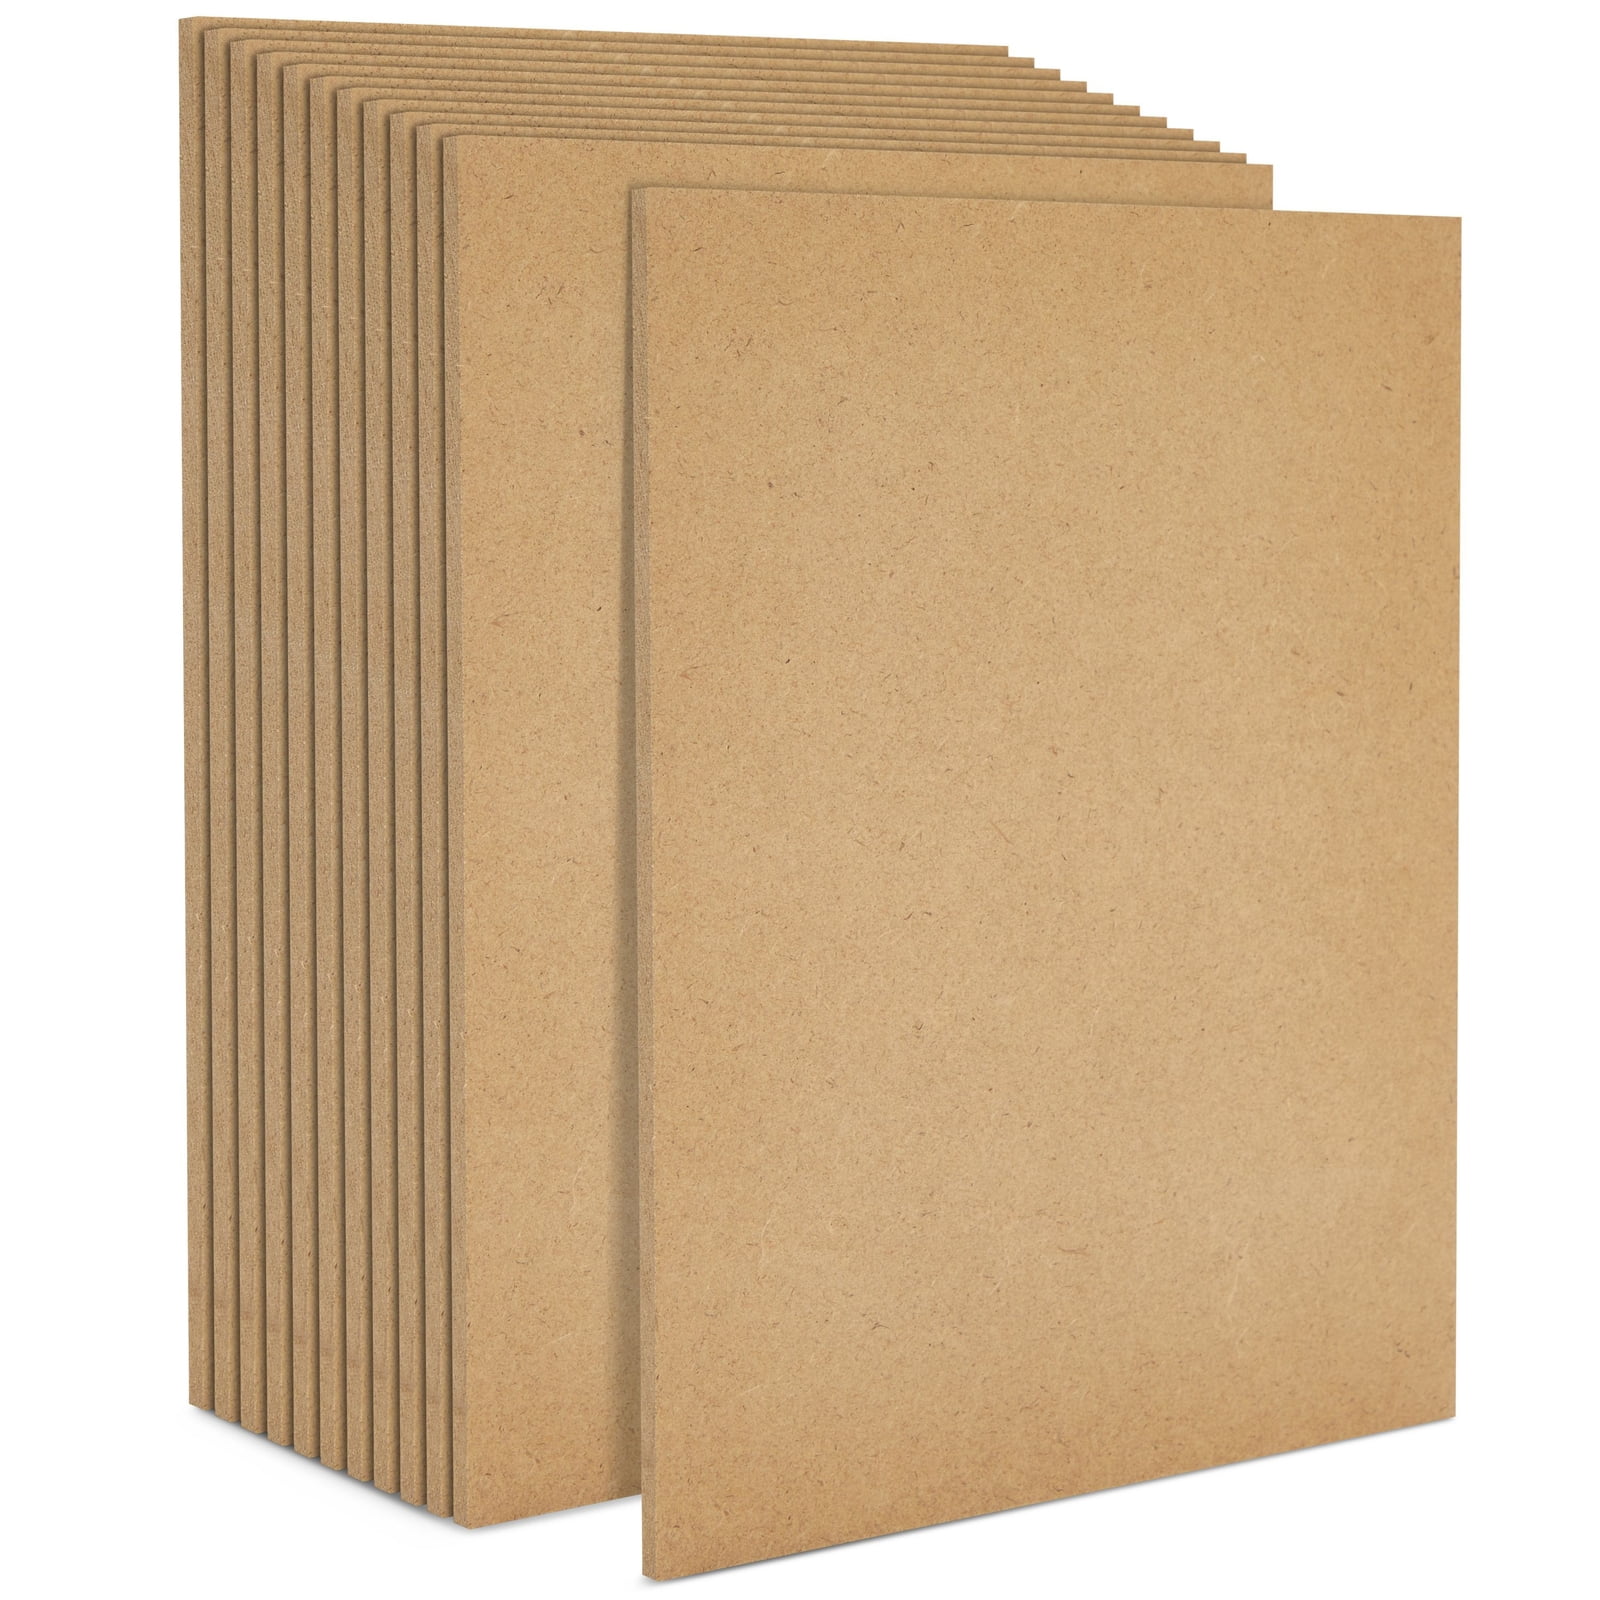 10 EcoSwift 12x12 Chipboard Cardboard Craft Scrapbook Material Scrapbooking  Packaging Sheets Shipping Pads Inserts 12 inch x 12 inch Chip Board 12x12